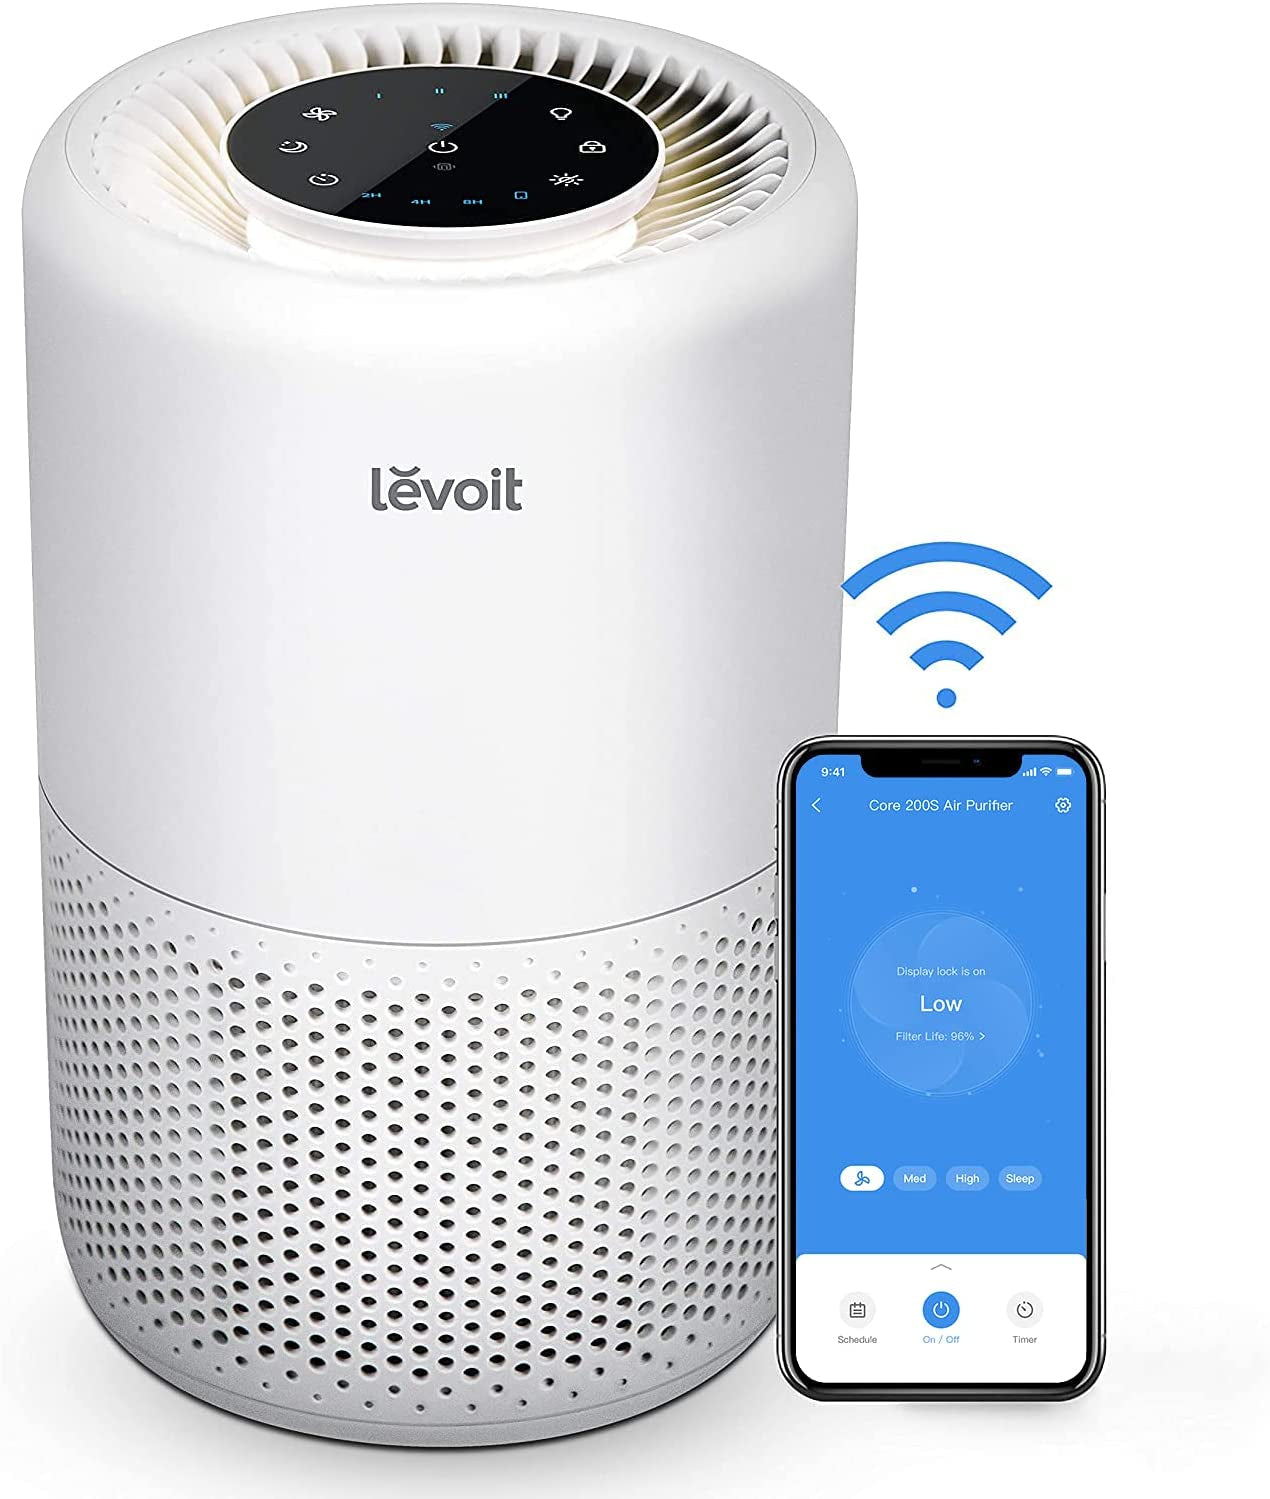 Levoit, LEVOIT Smart Wifi Air Purifier for Home, Alexa Enabled H13 True HEPA Filter for Allergies, Pets, Smokers, Smoke, Dust, Pollen, 24Db Quiet Air Cleaner for Bedroom with Display off Design, Core 200S